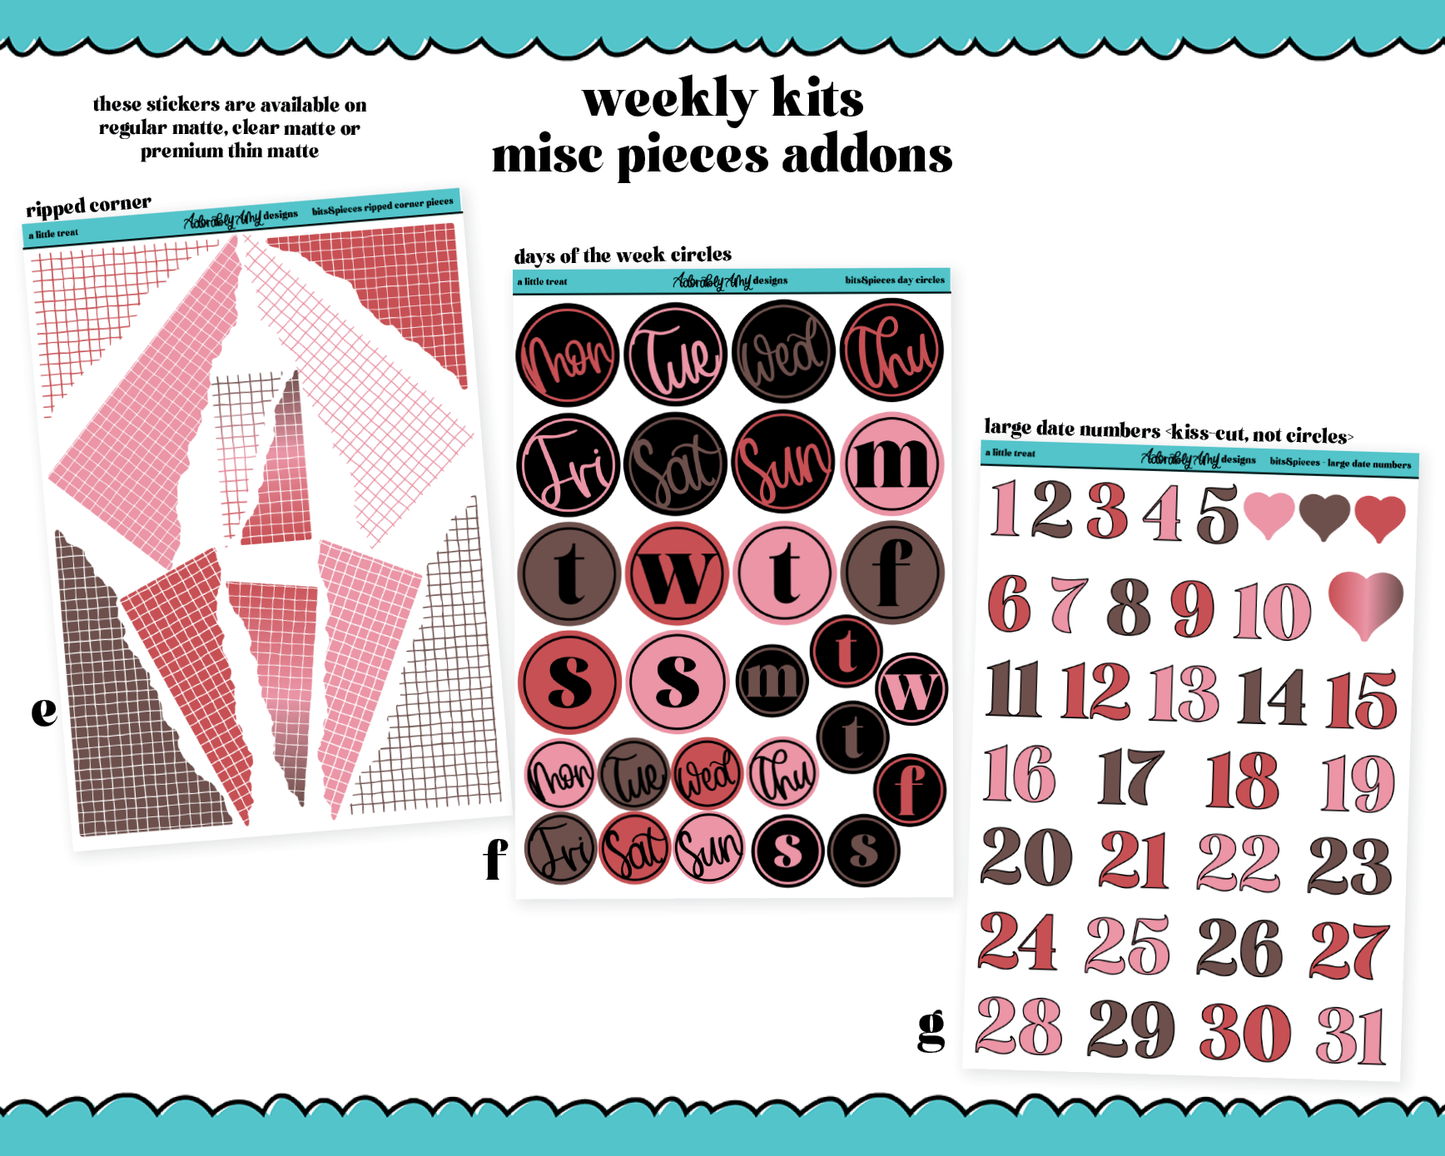 A Little Treat Weekly Kit Addons - All Sizes - Deco, Smears and More!